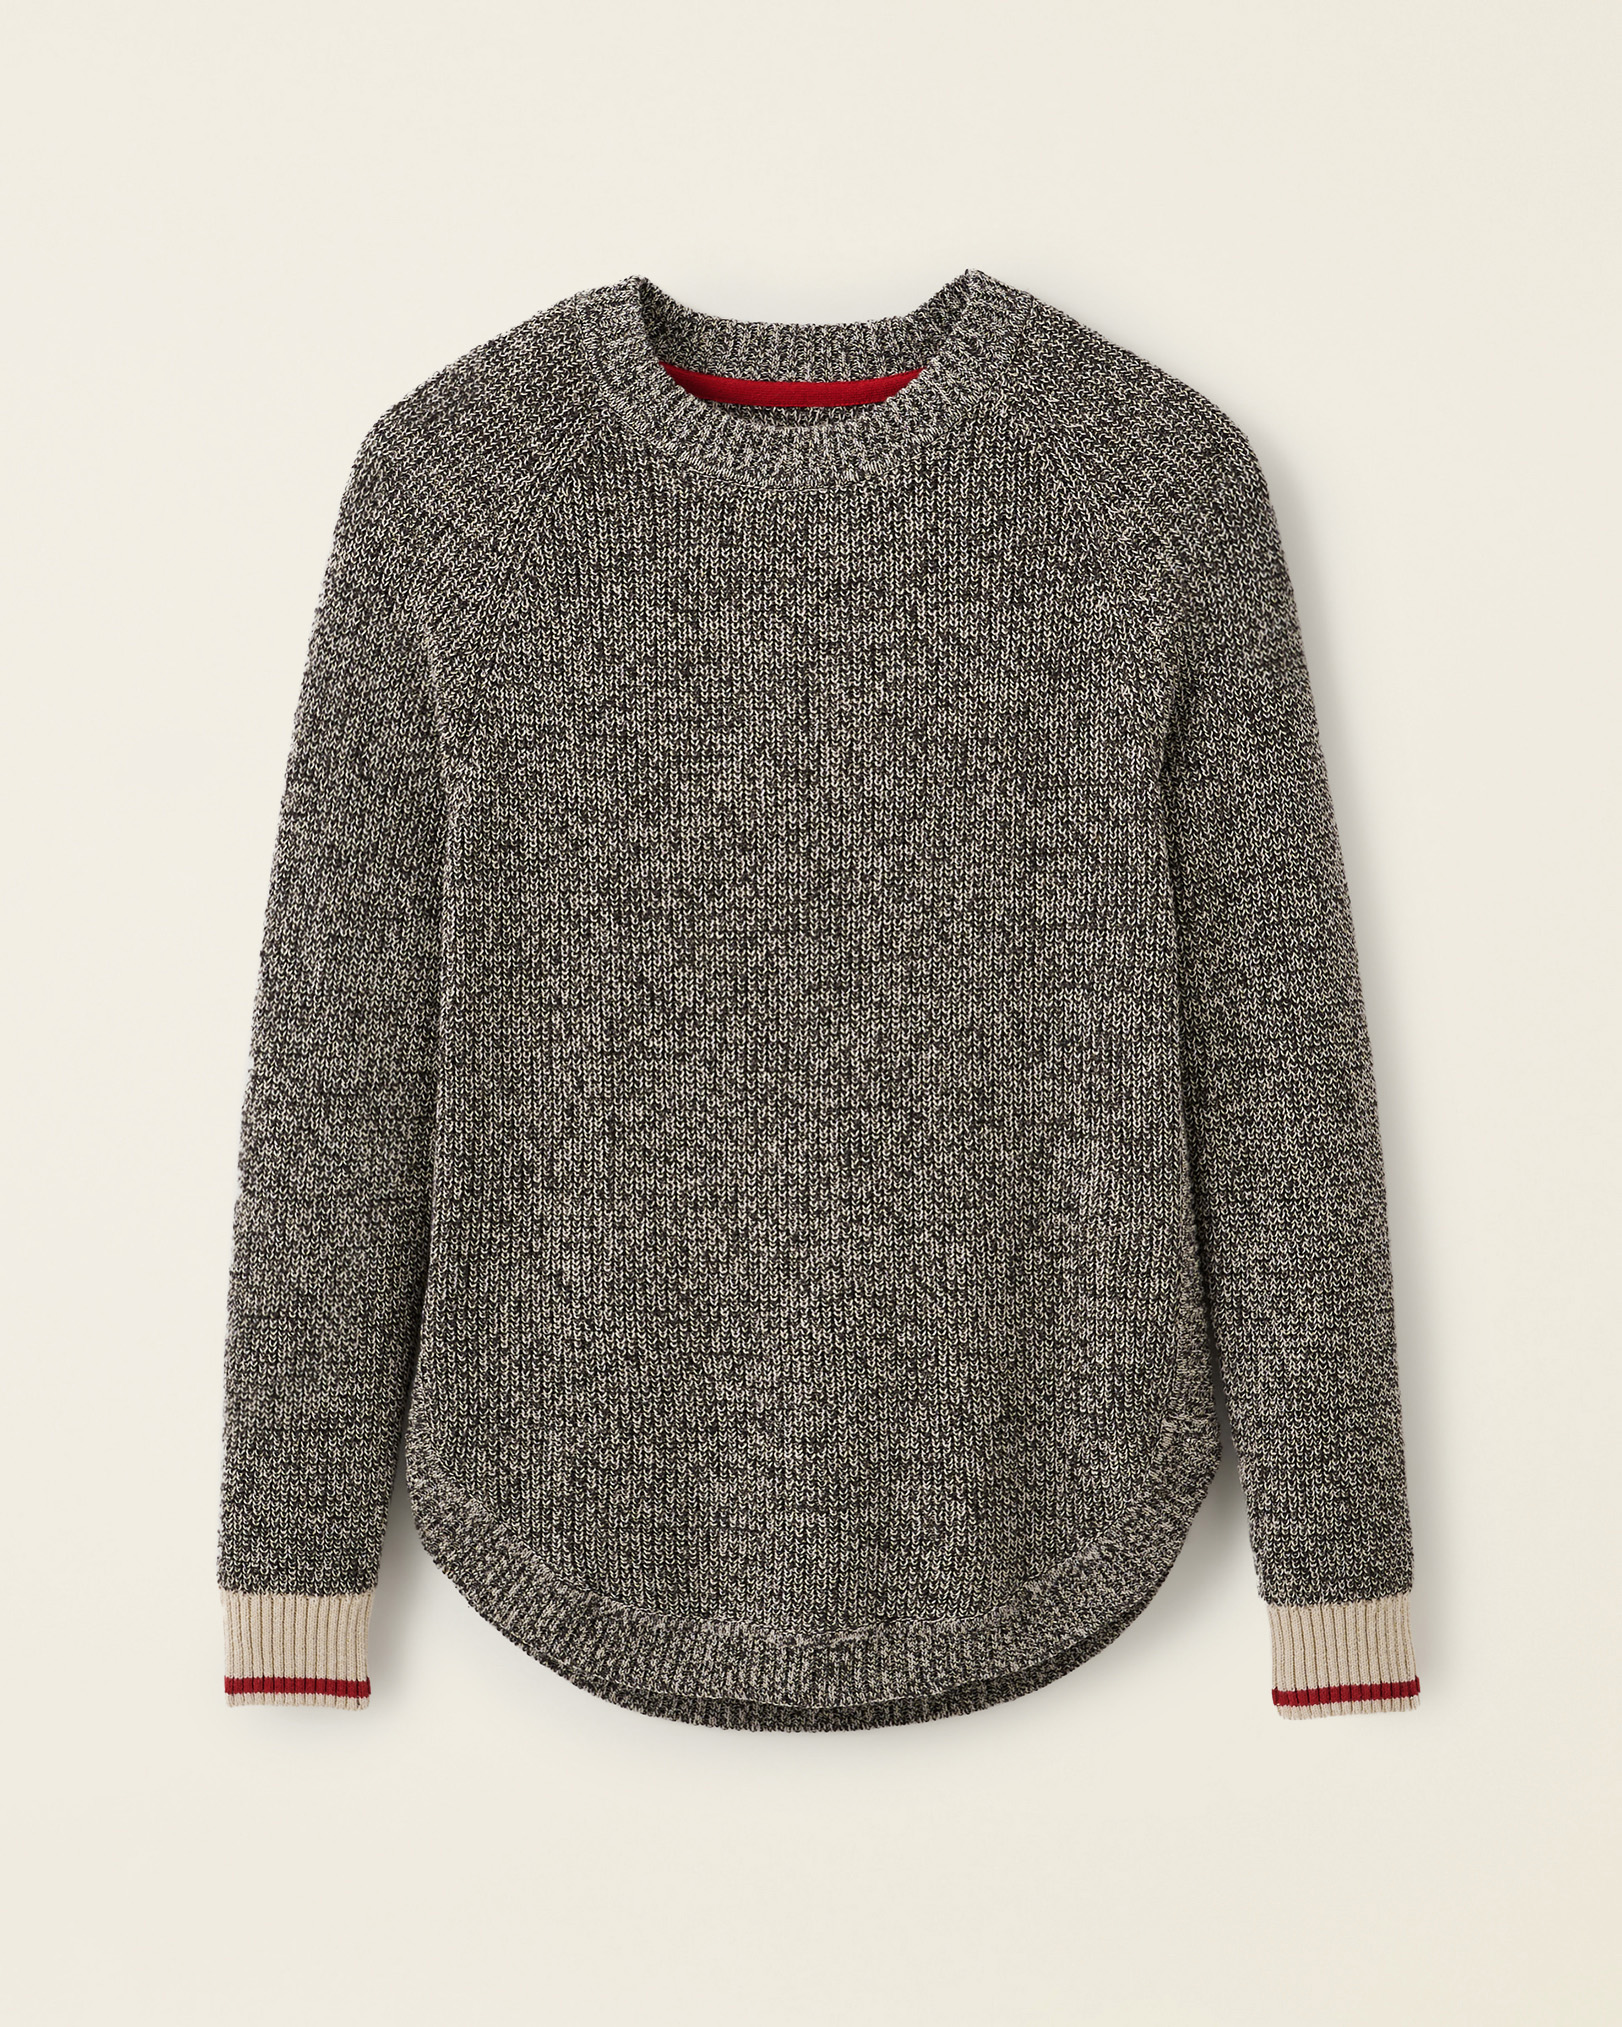 Roots Cabin Shaker Crew Sweater Shirt in Grey Oat Mix